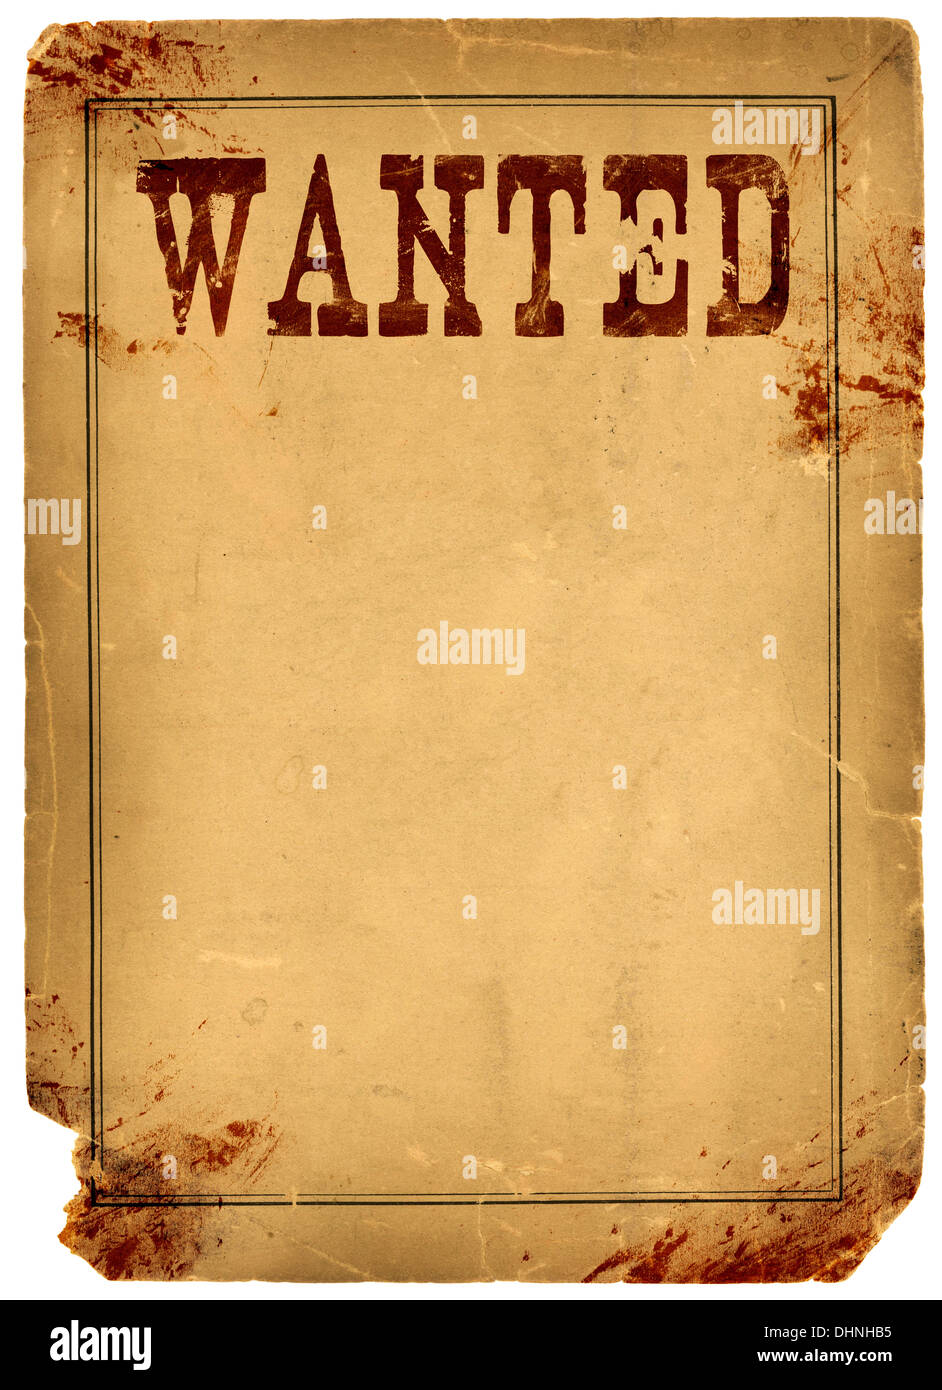 Bloody stained old western wanted poster made from real antique 1800s